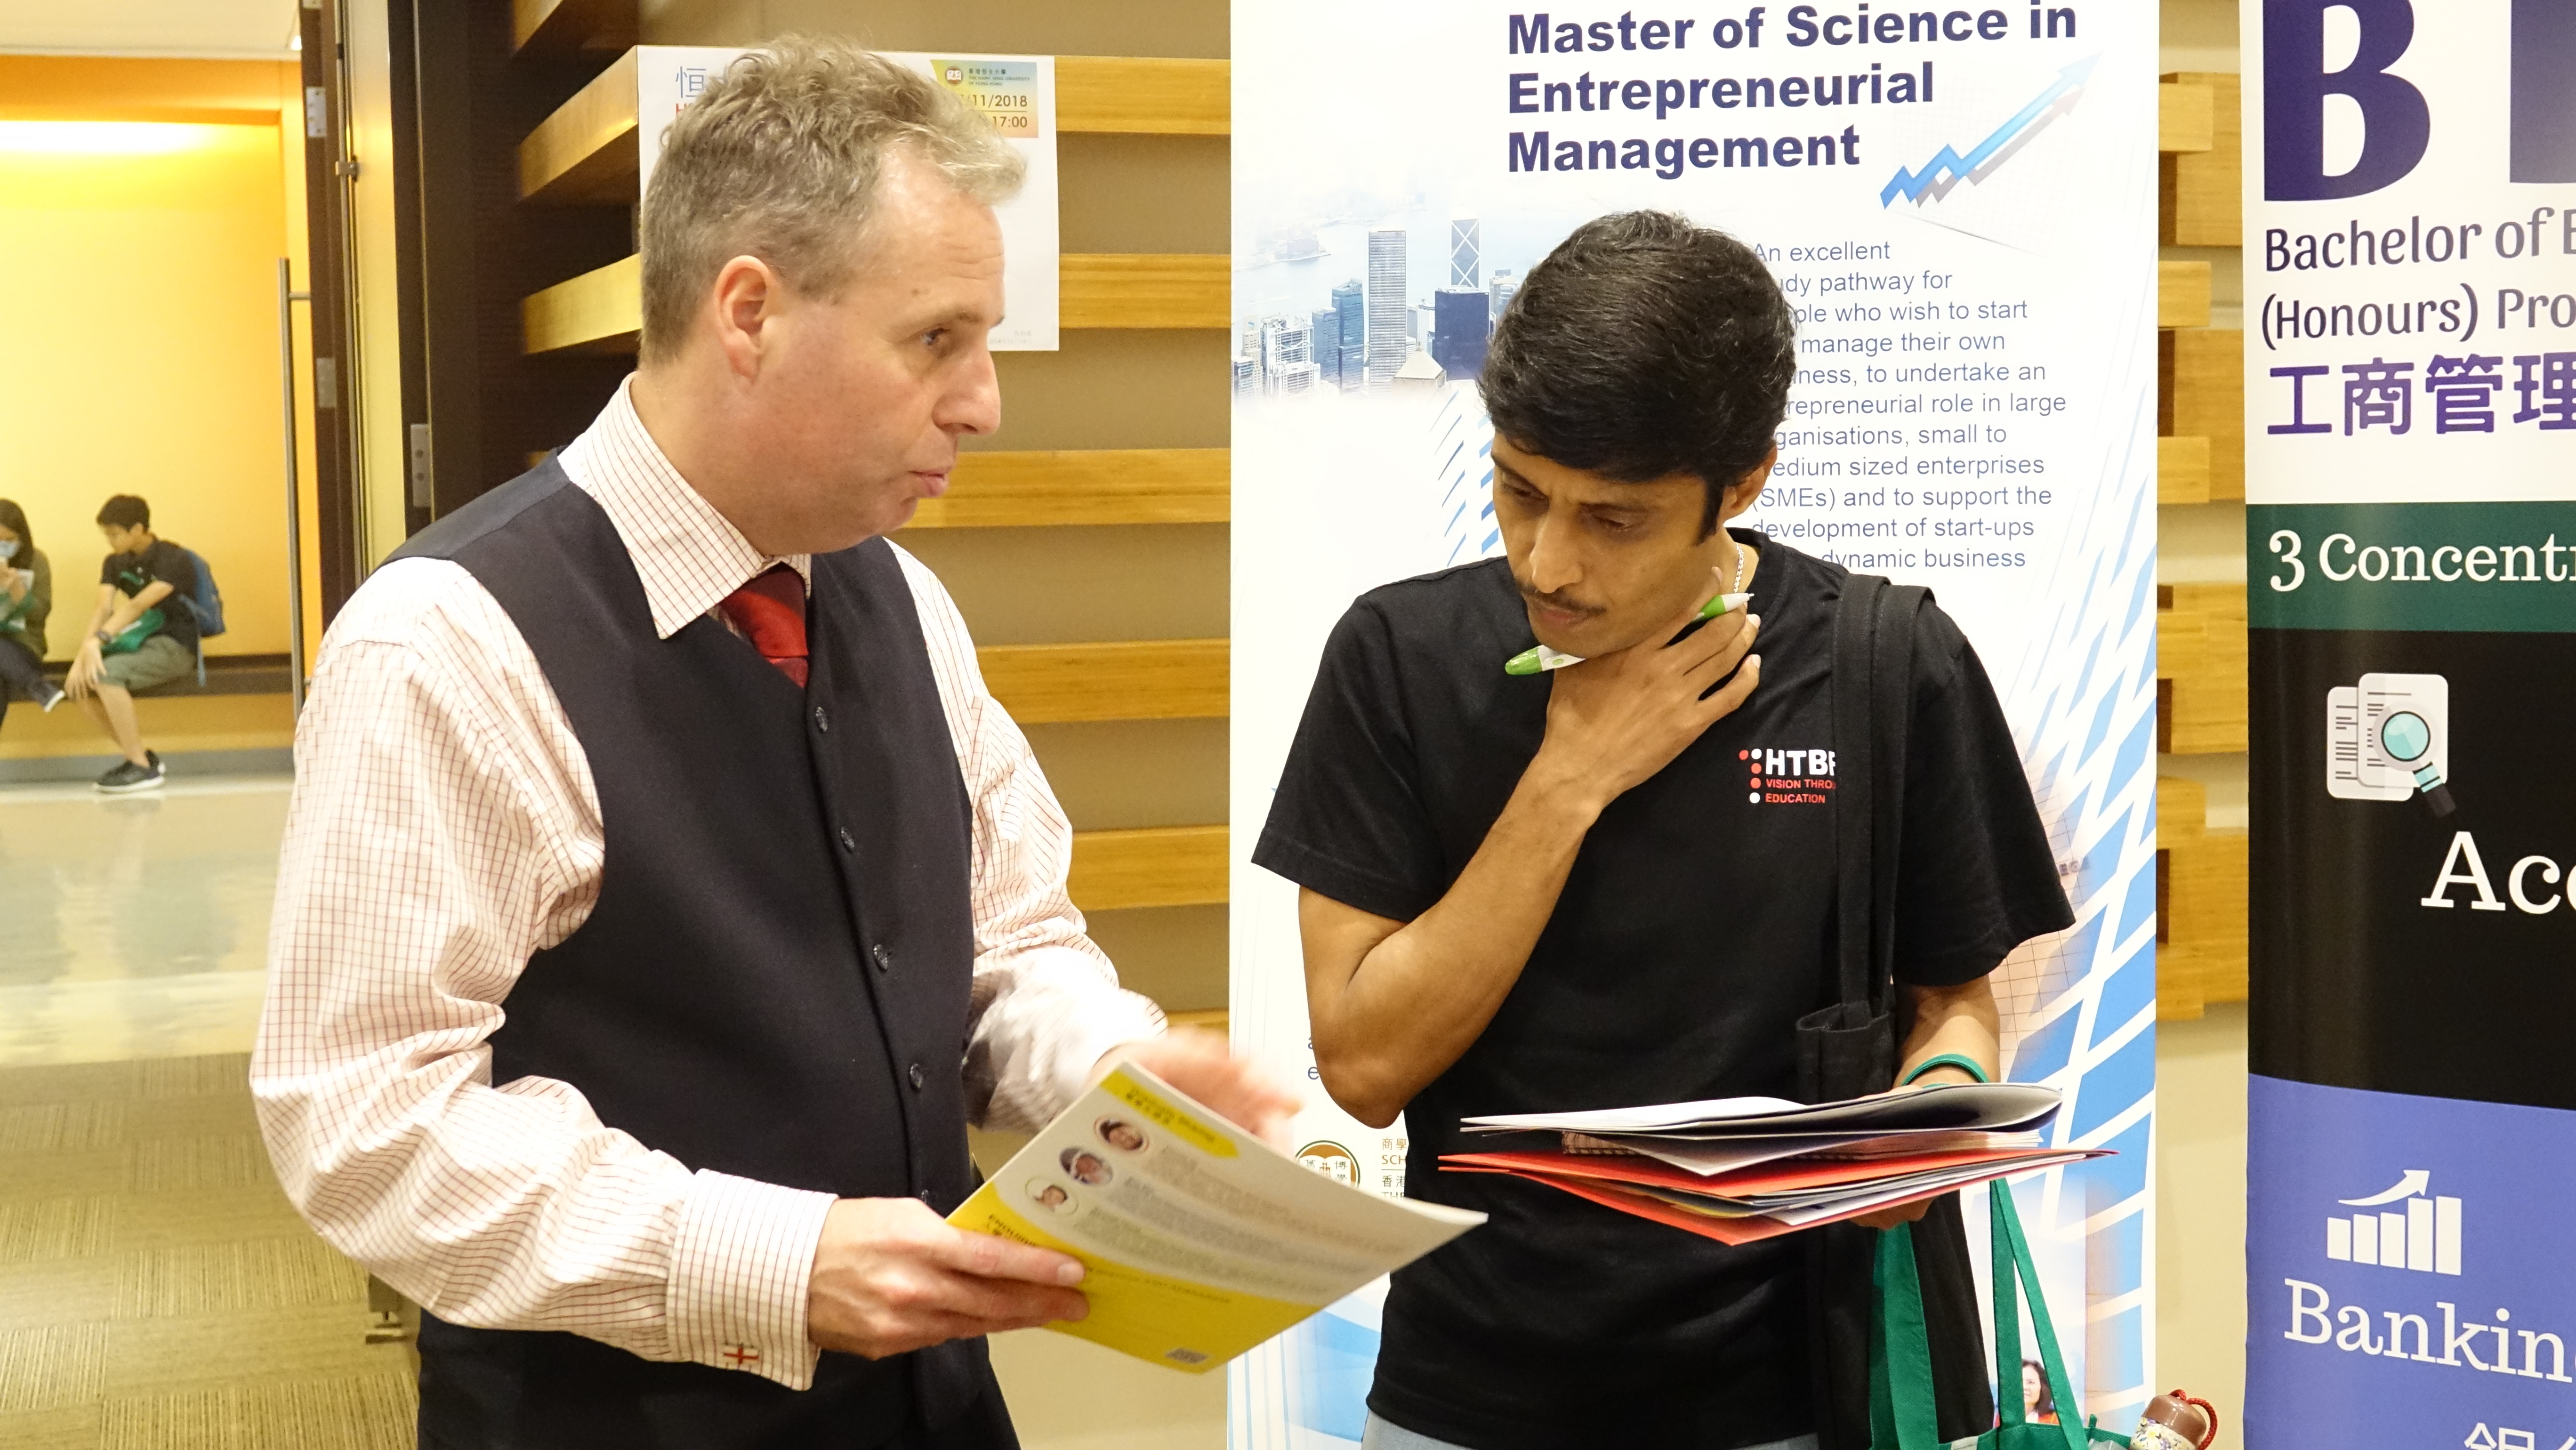 Prof Barnes talked to the father of an Indian student who wants to join the BBA in Global Business Management Programme.